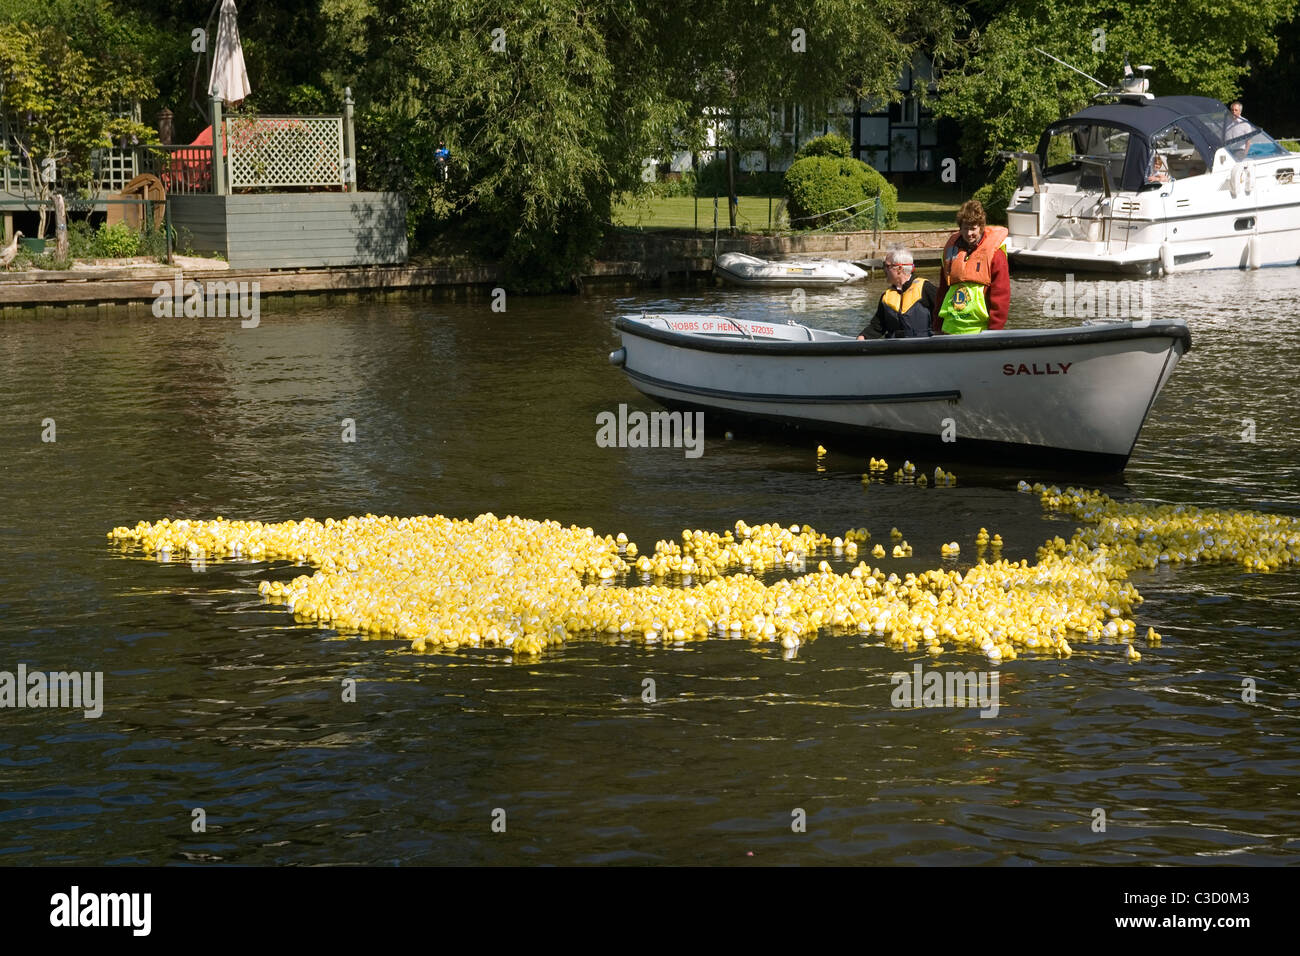 England Oxfordshire Henley, Duck derby charity race Stock Photo